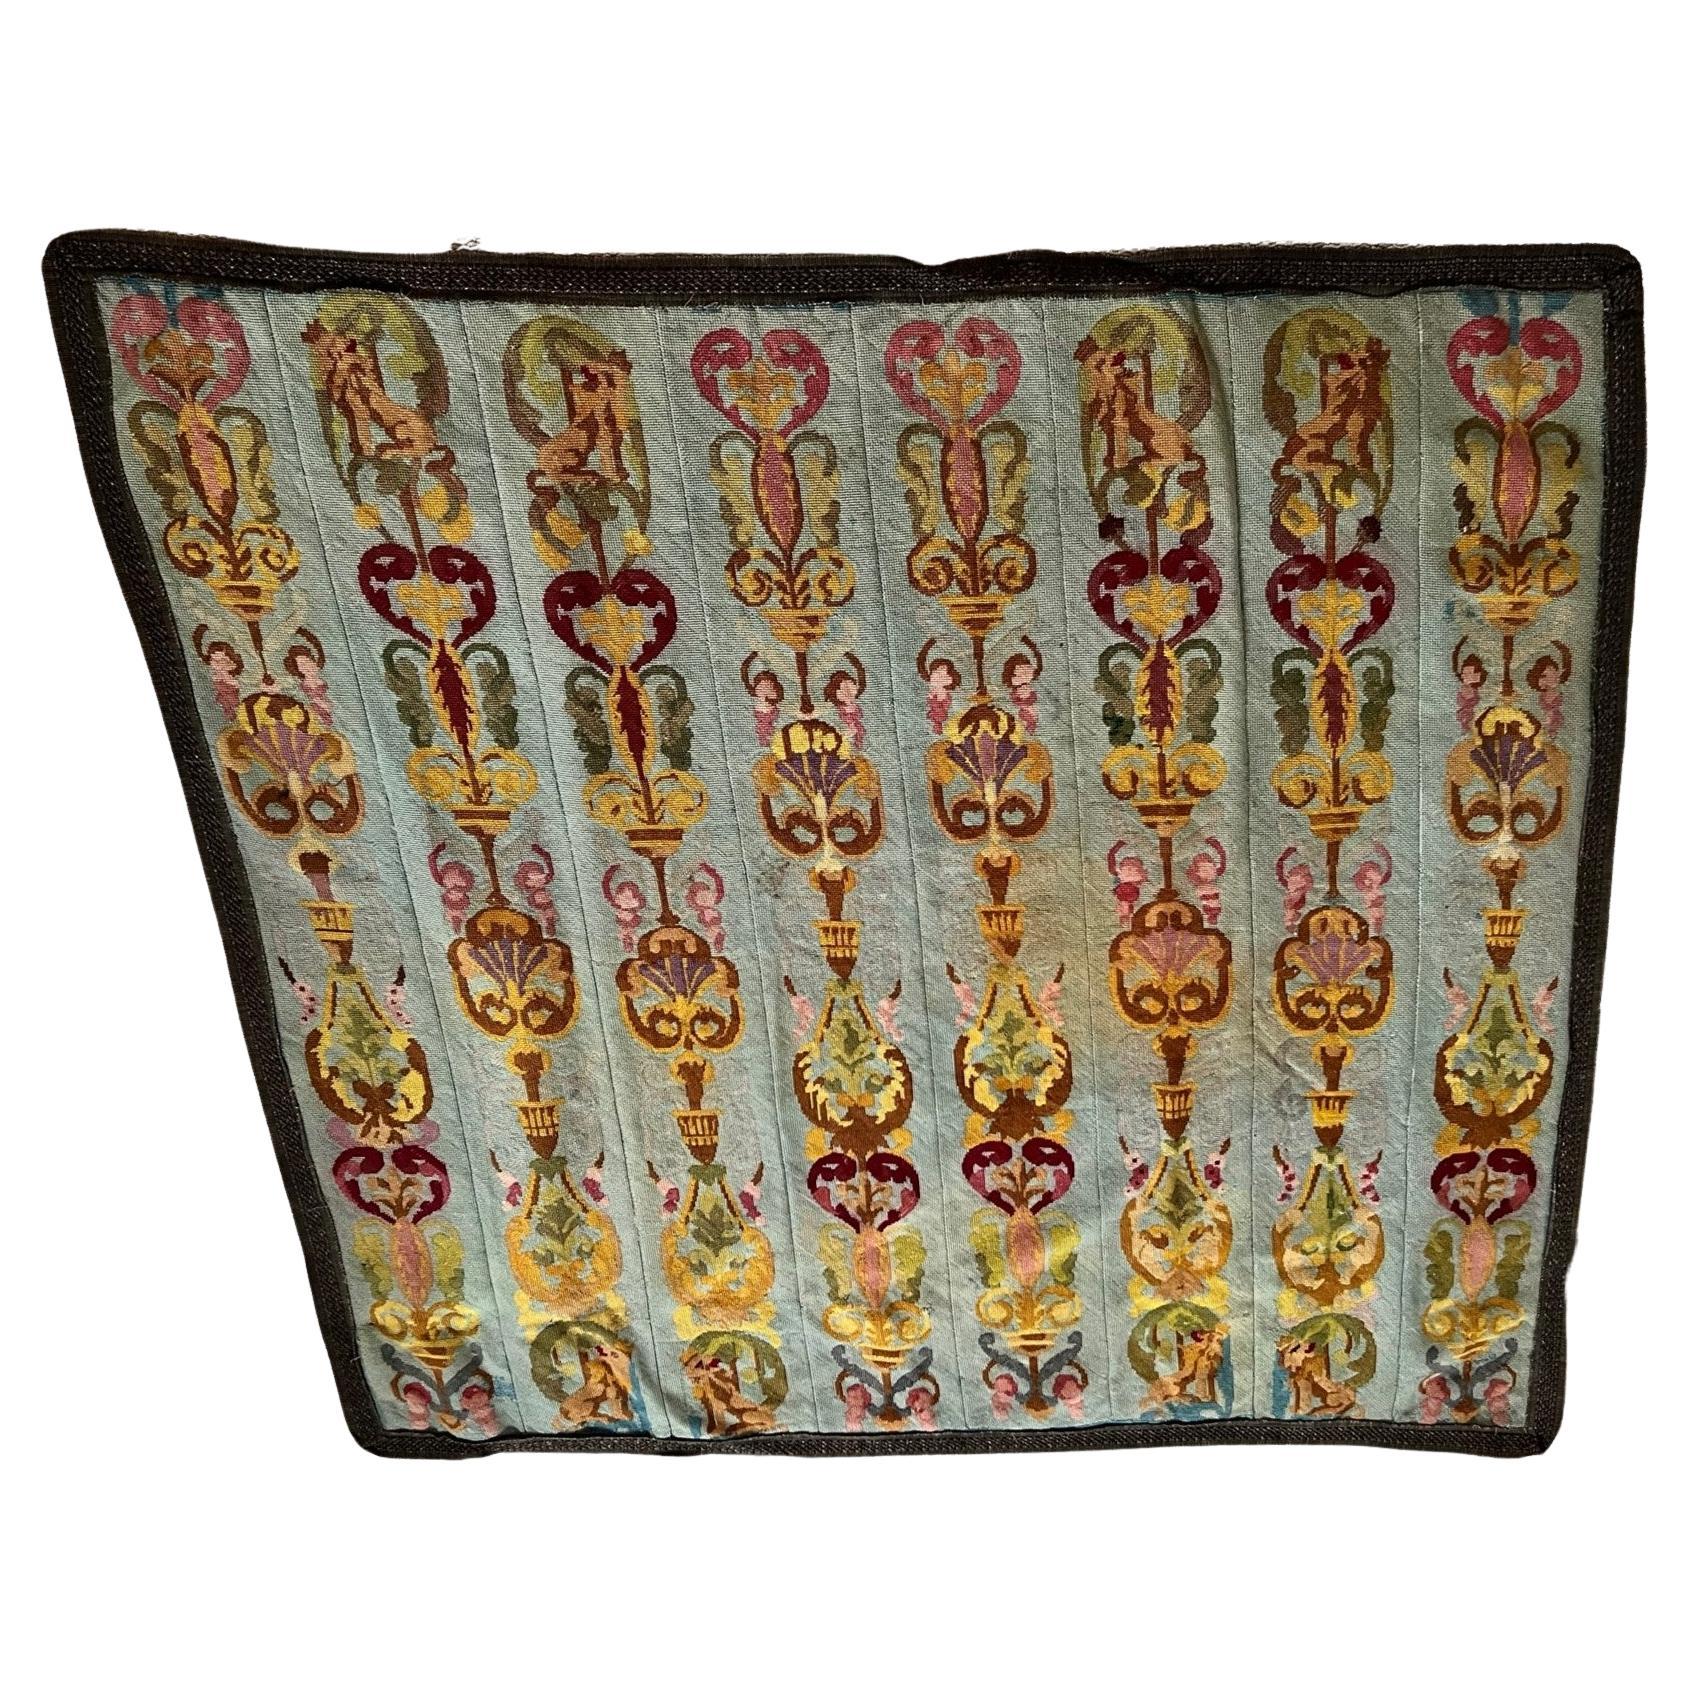 An unusual aubusson-style tapestry wall hanging comprising 8 panels with recurring lion, urn and floral motifs on a pale blue field with a passementeire border and cotton backing. While the colors of the tapestry have faded somewhat over time, the